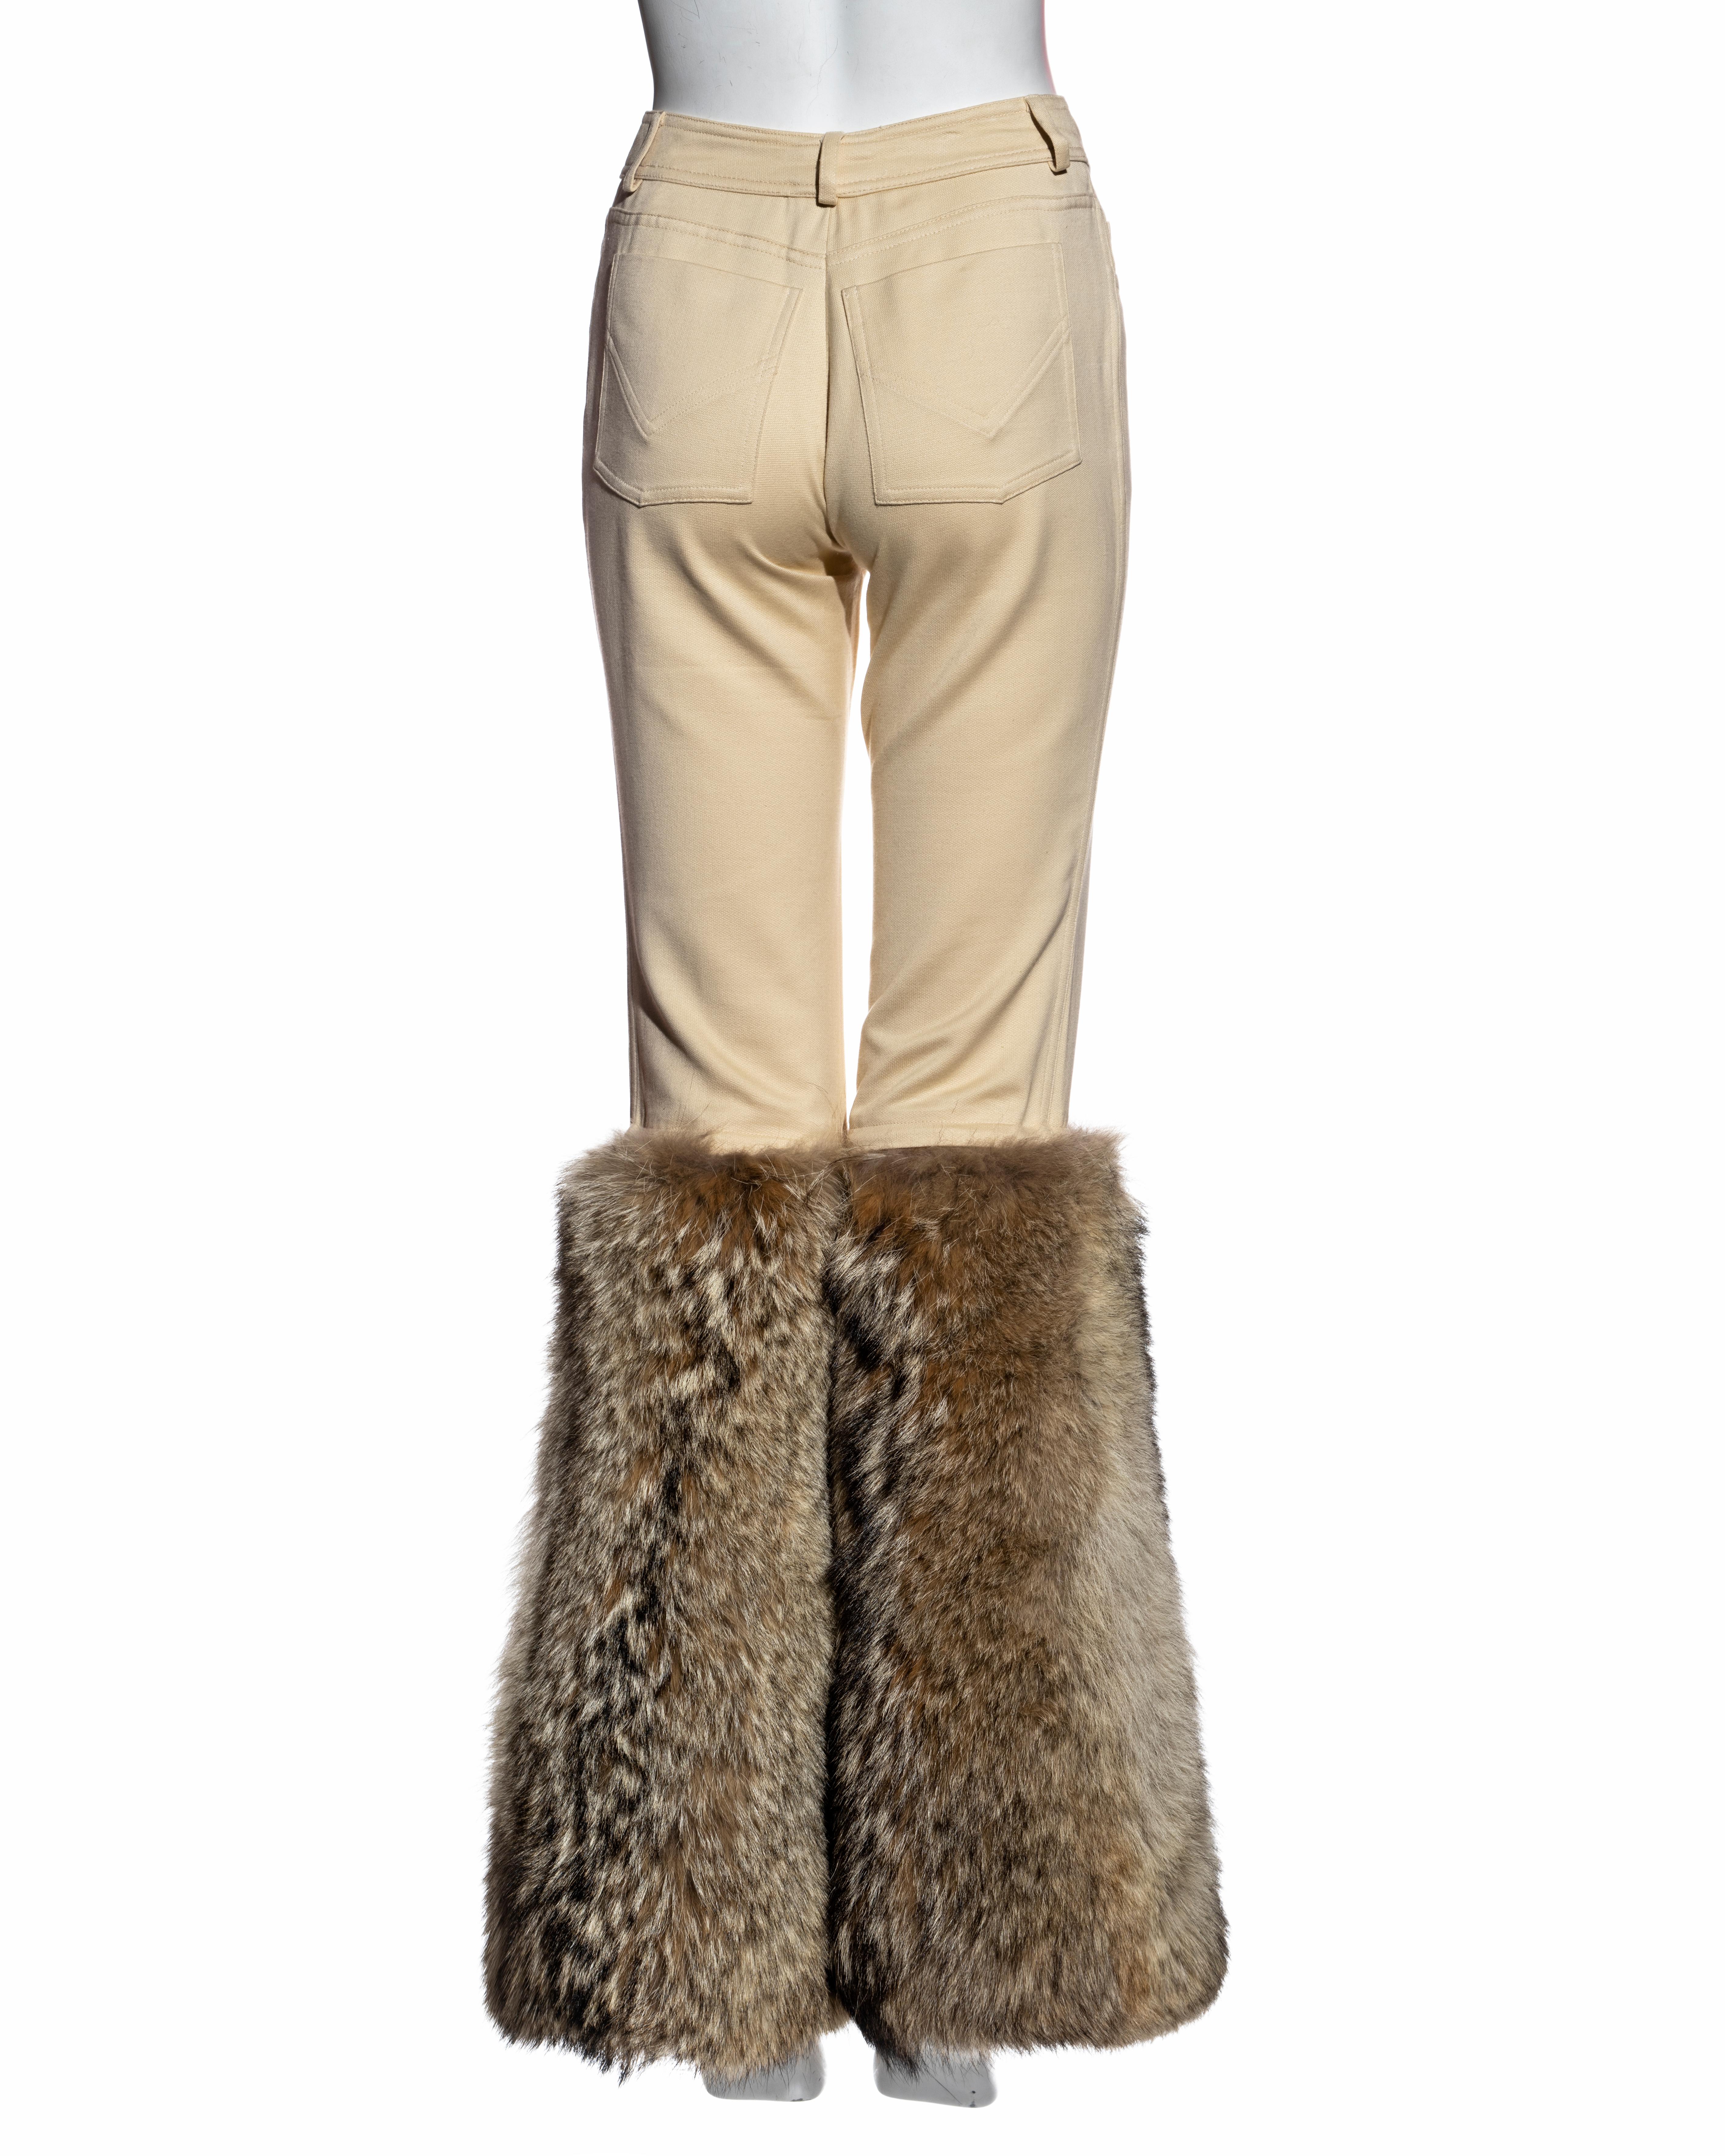 Christian Dior by John Galliano cream cotton pants with coyote fur 